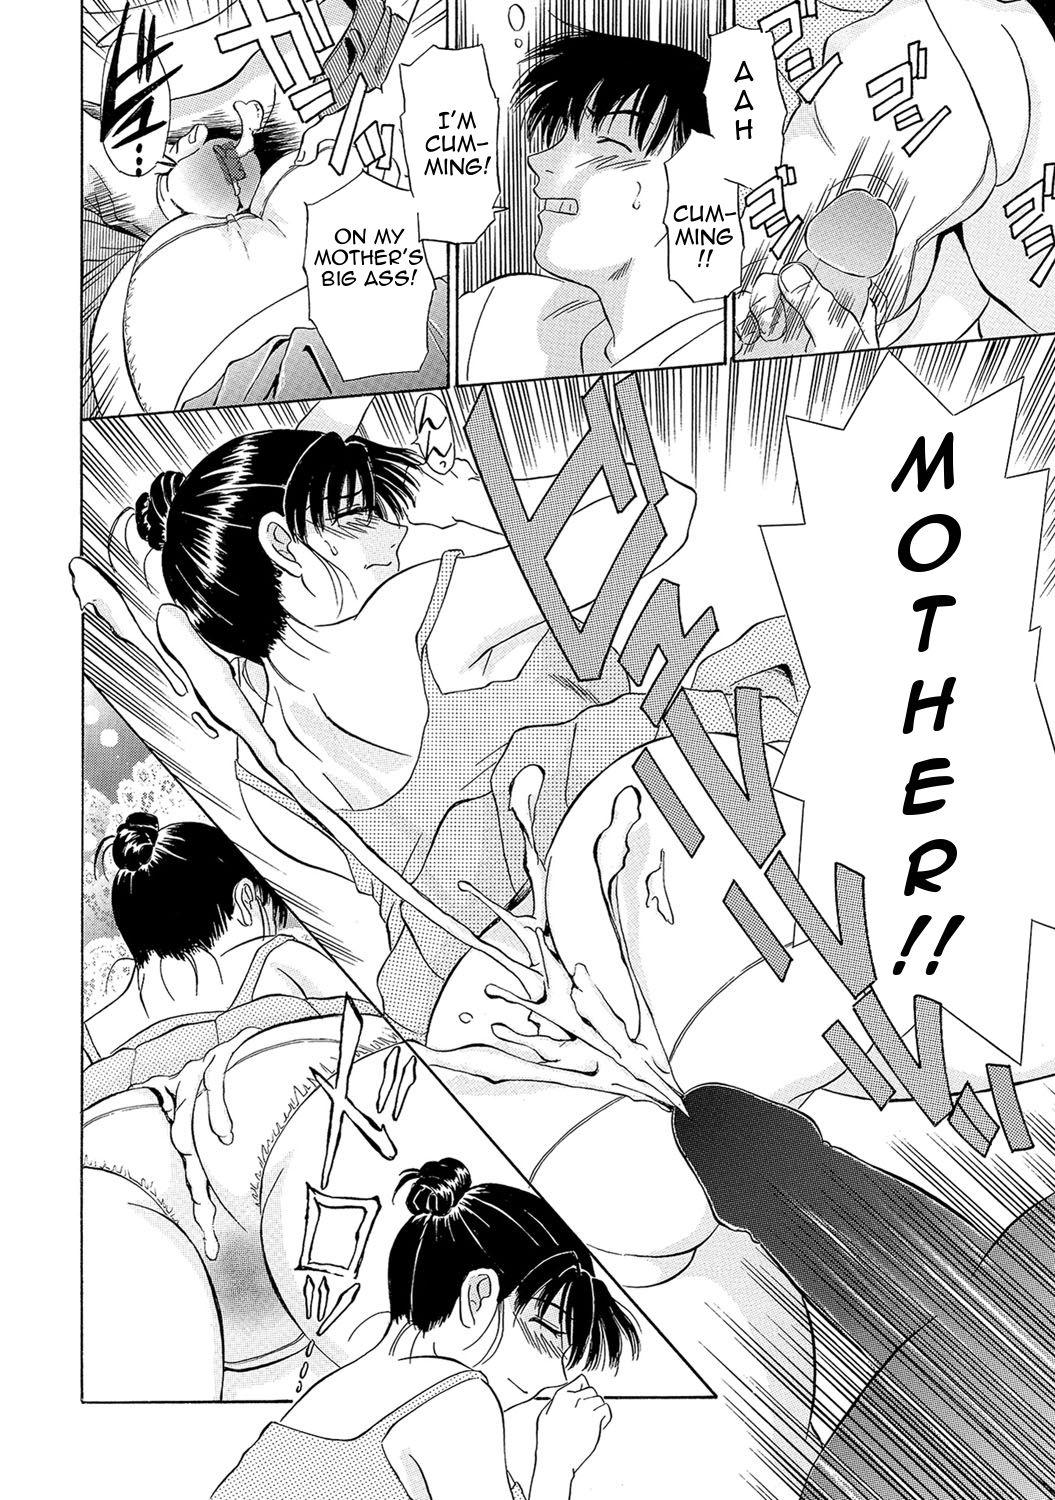 Olderwoman Urete... Hoshii | Want to... Become Mature Ass Lick - Page 9